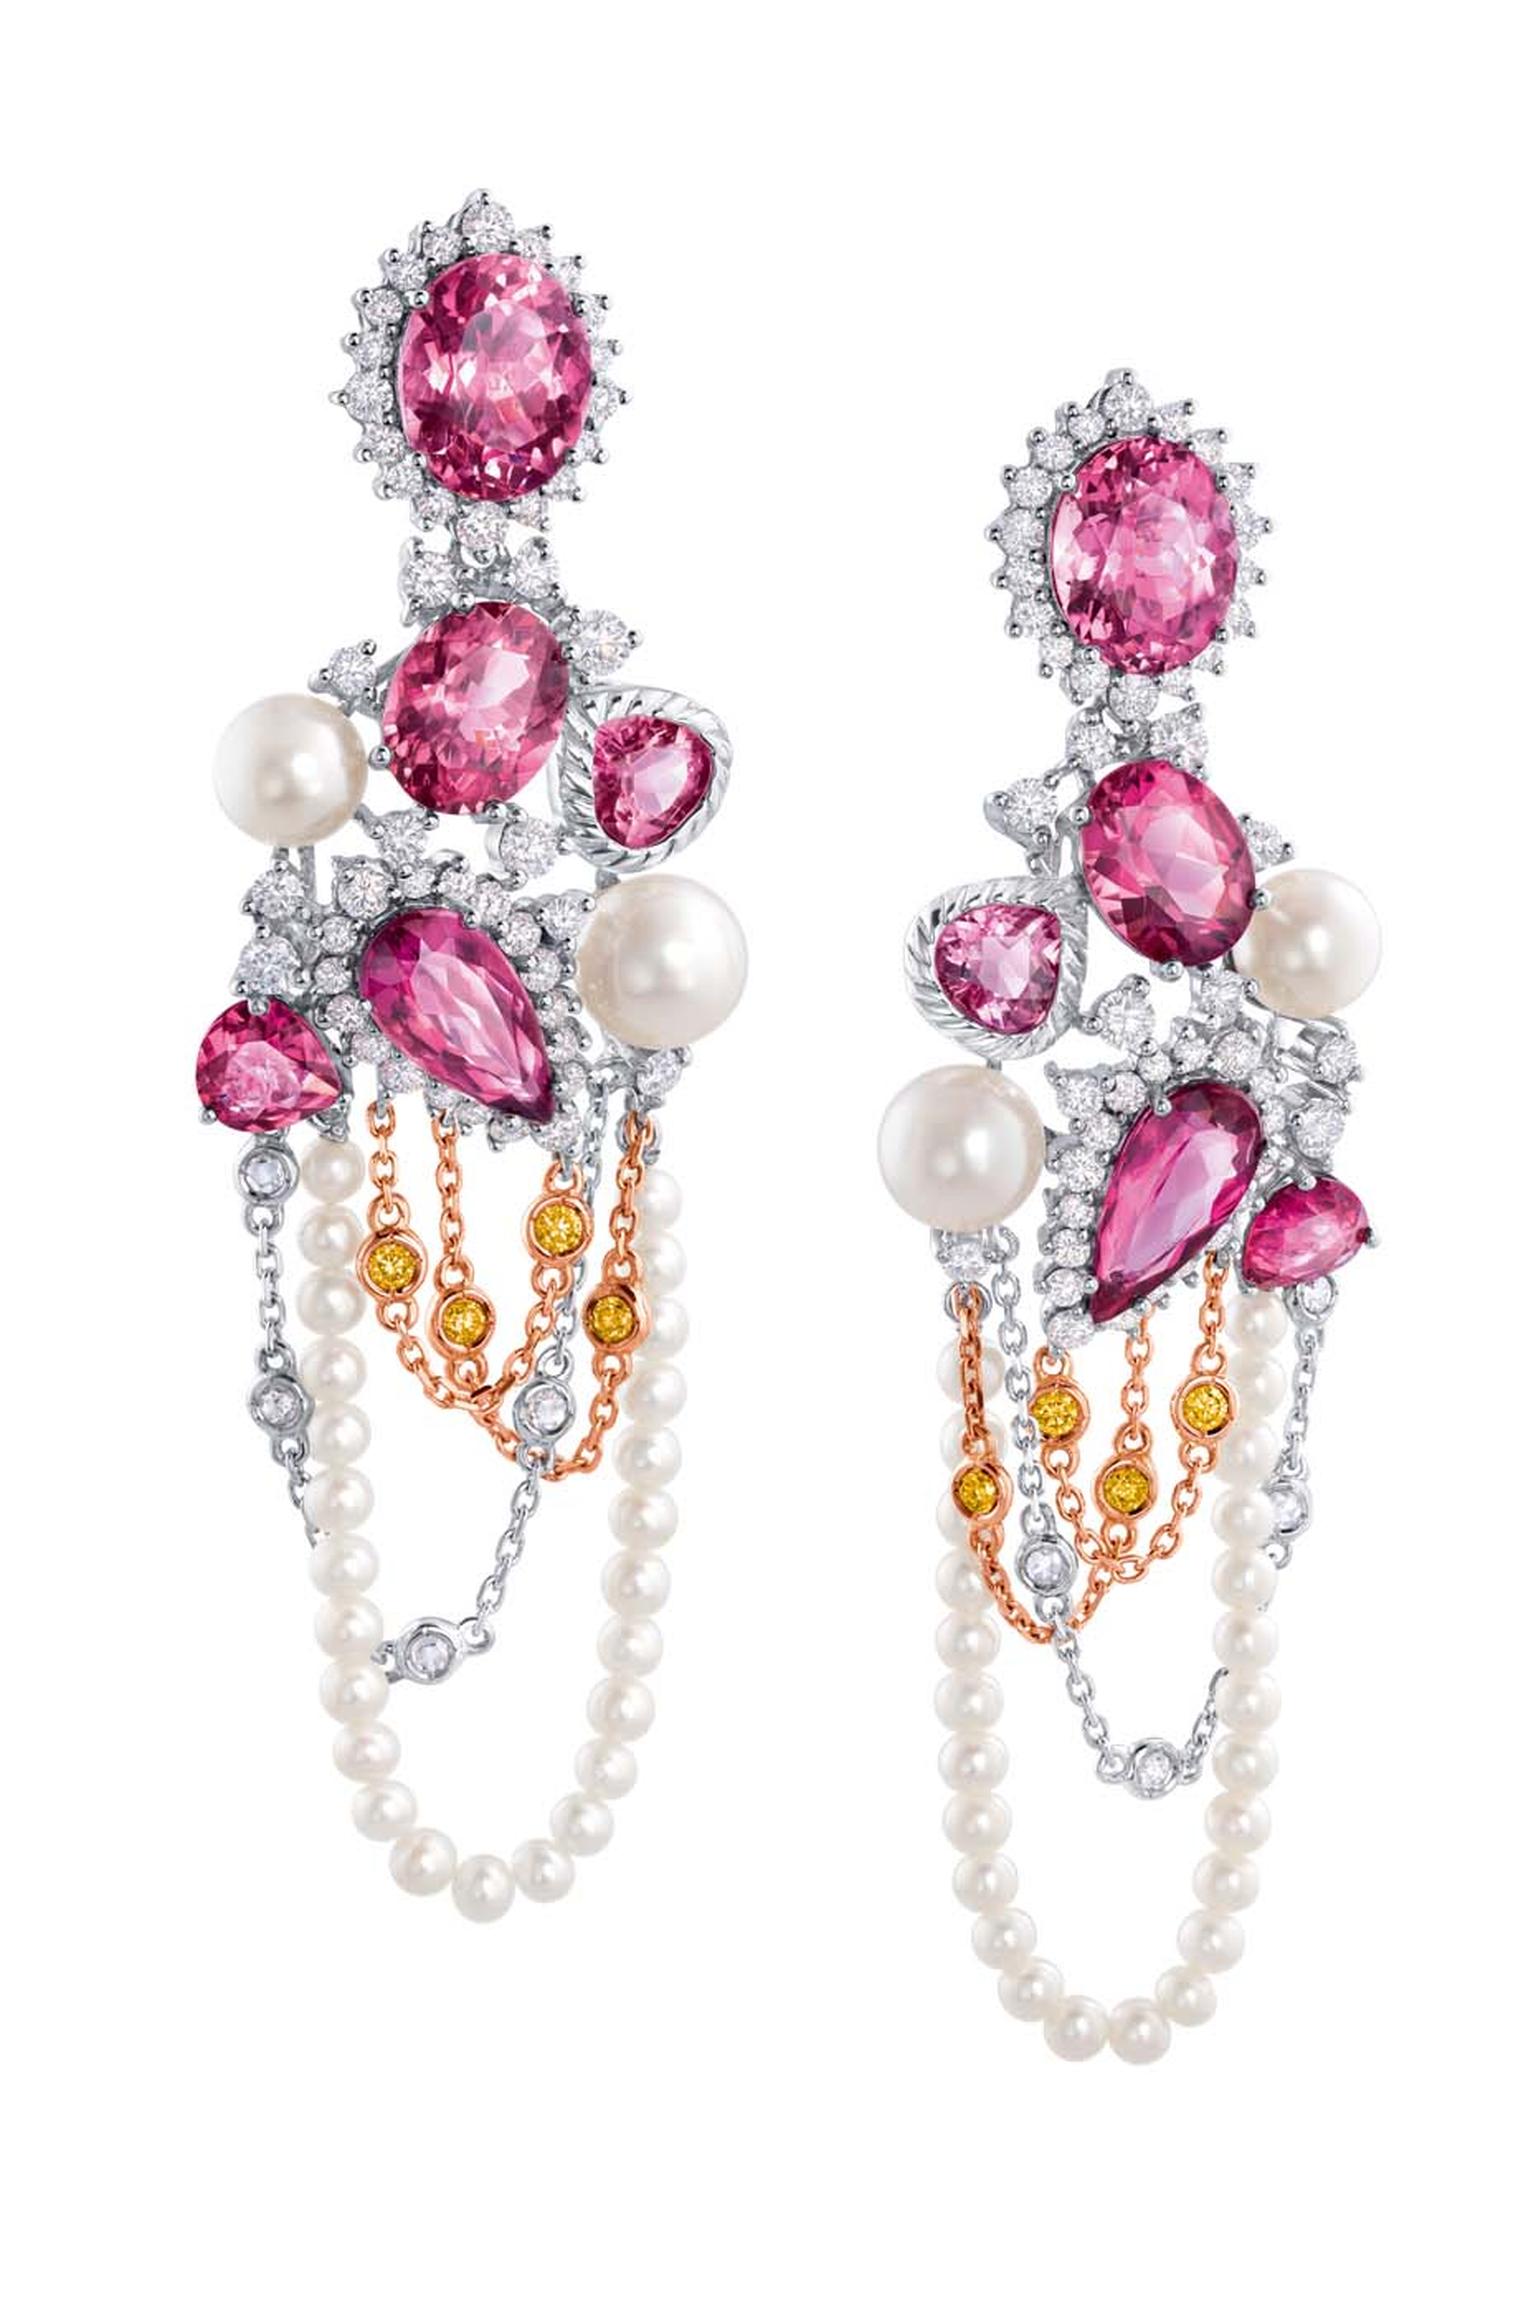 Chow Tai Fook Reflections of Siem Zephyr earrings with pink diamonds, pearls and purple and red tourmalines.